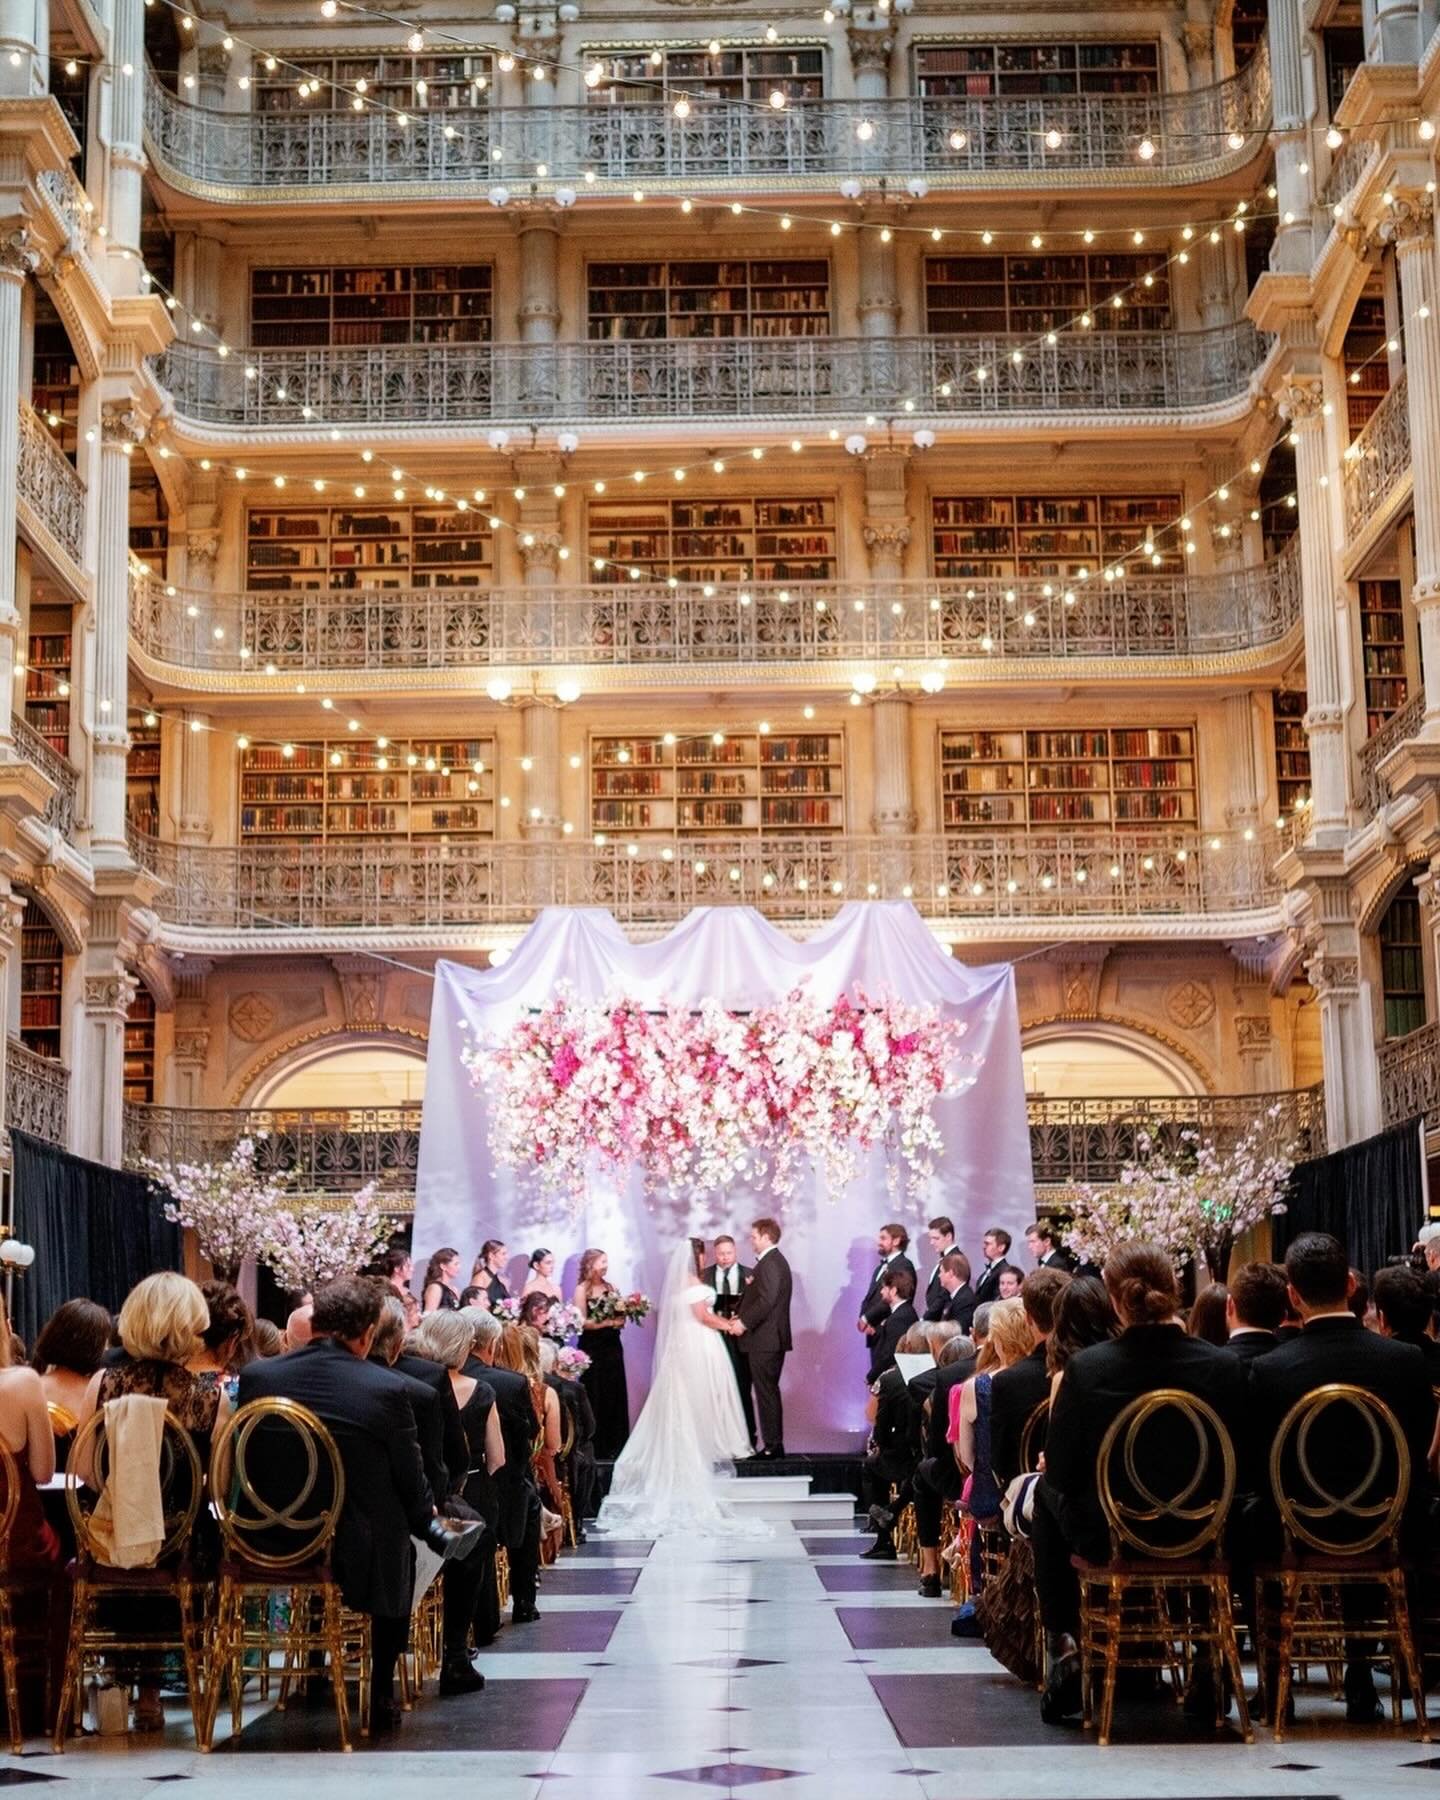 The most beautiful and unique ceremony we ever did see at the gorgeous George Peabody Library!
⠀⠀⠀⠀⠀⠀⠀⠀⠀
Photos: @annaandmateo @smittencontent 
Wedding Photography: @rodneybaileyphotojournalist_
Planning and Design: @nouvelleweddings @lynn_aaron
Flor